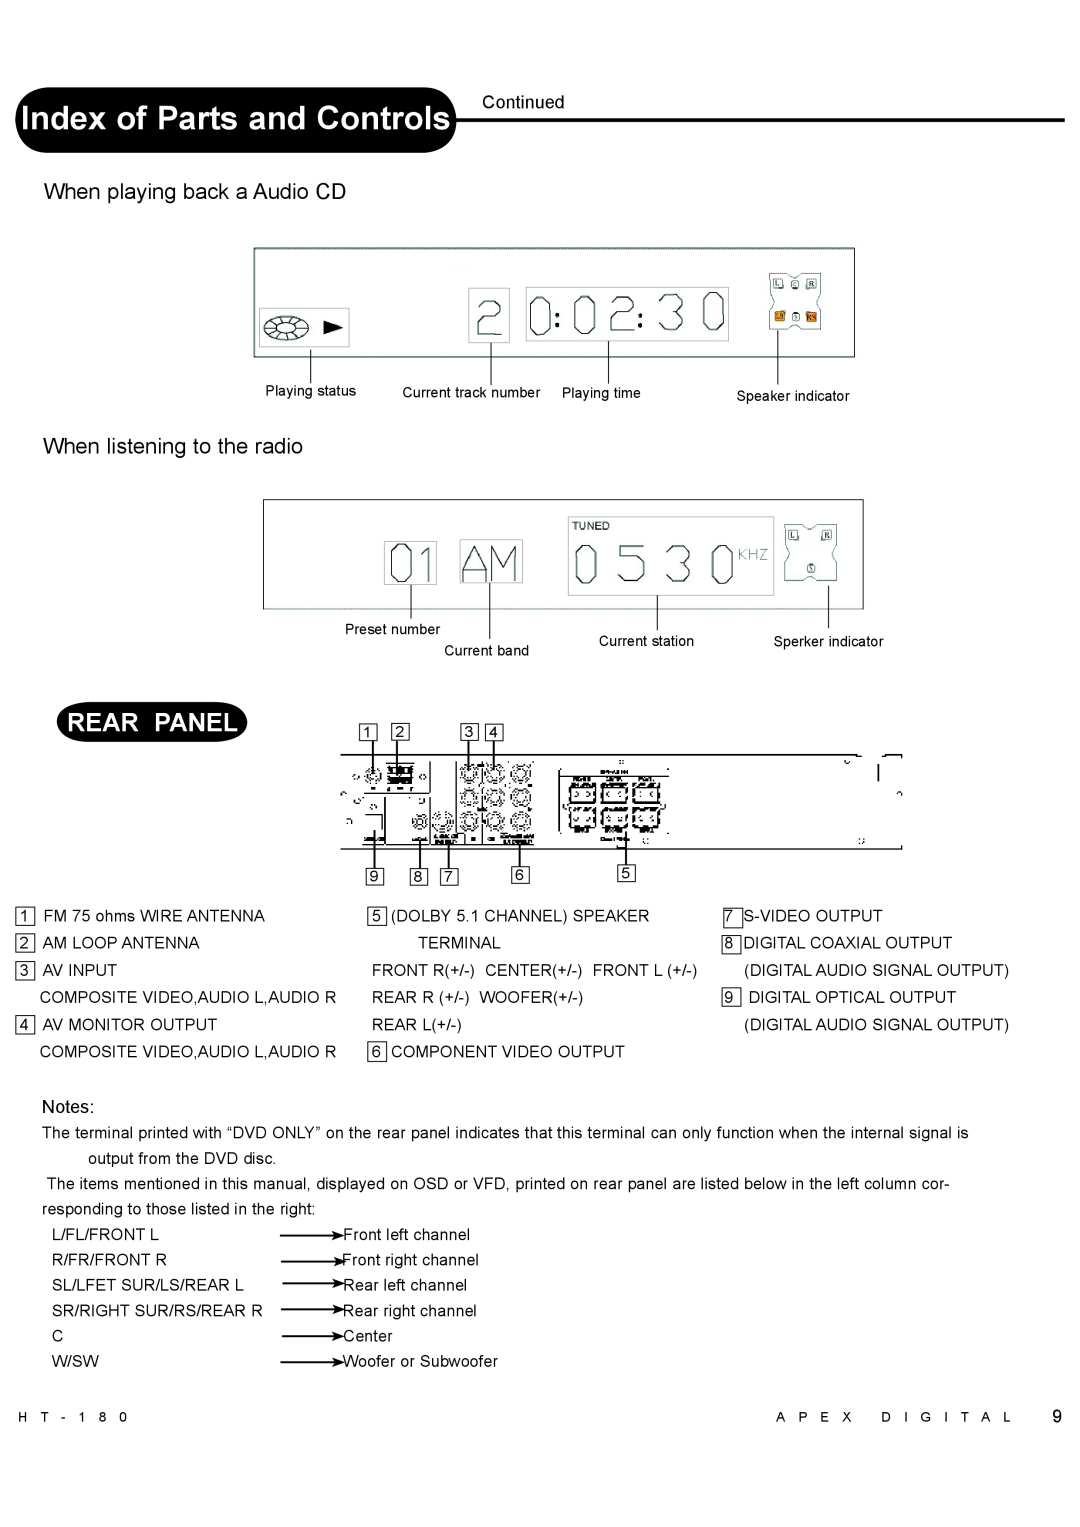 Apex Digital HT-180 manual Index of Parts and Controls Continued, Rear Panel, When playing back a Audio CD 